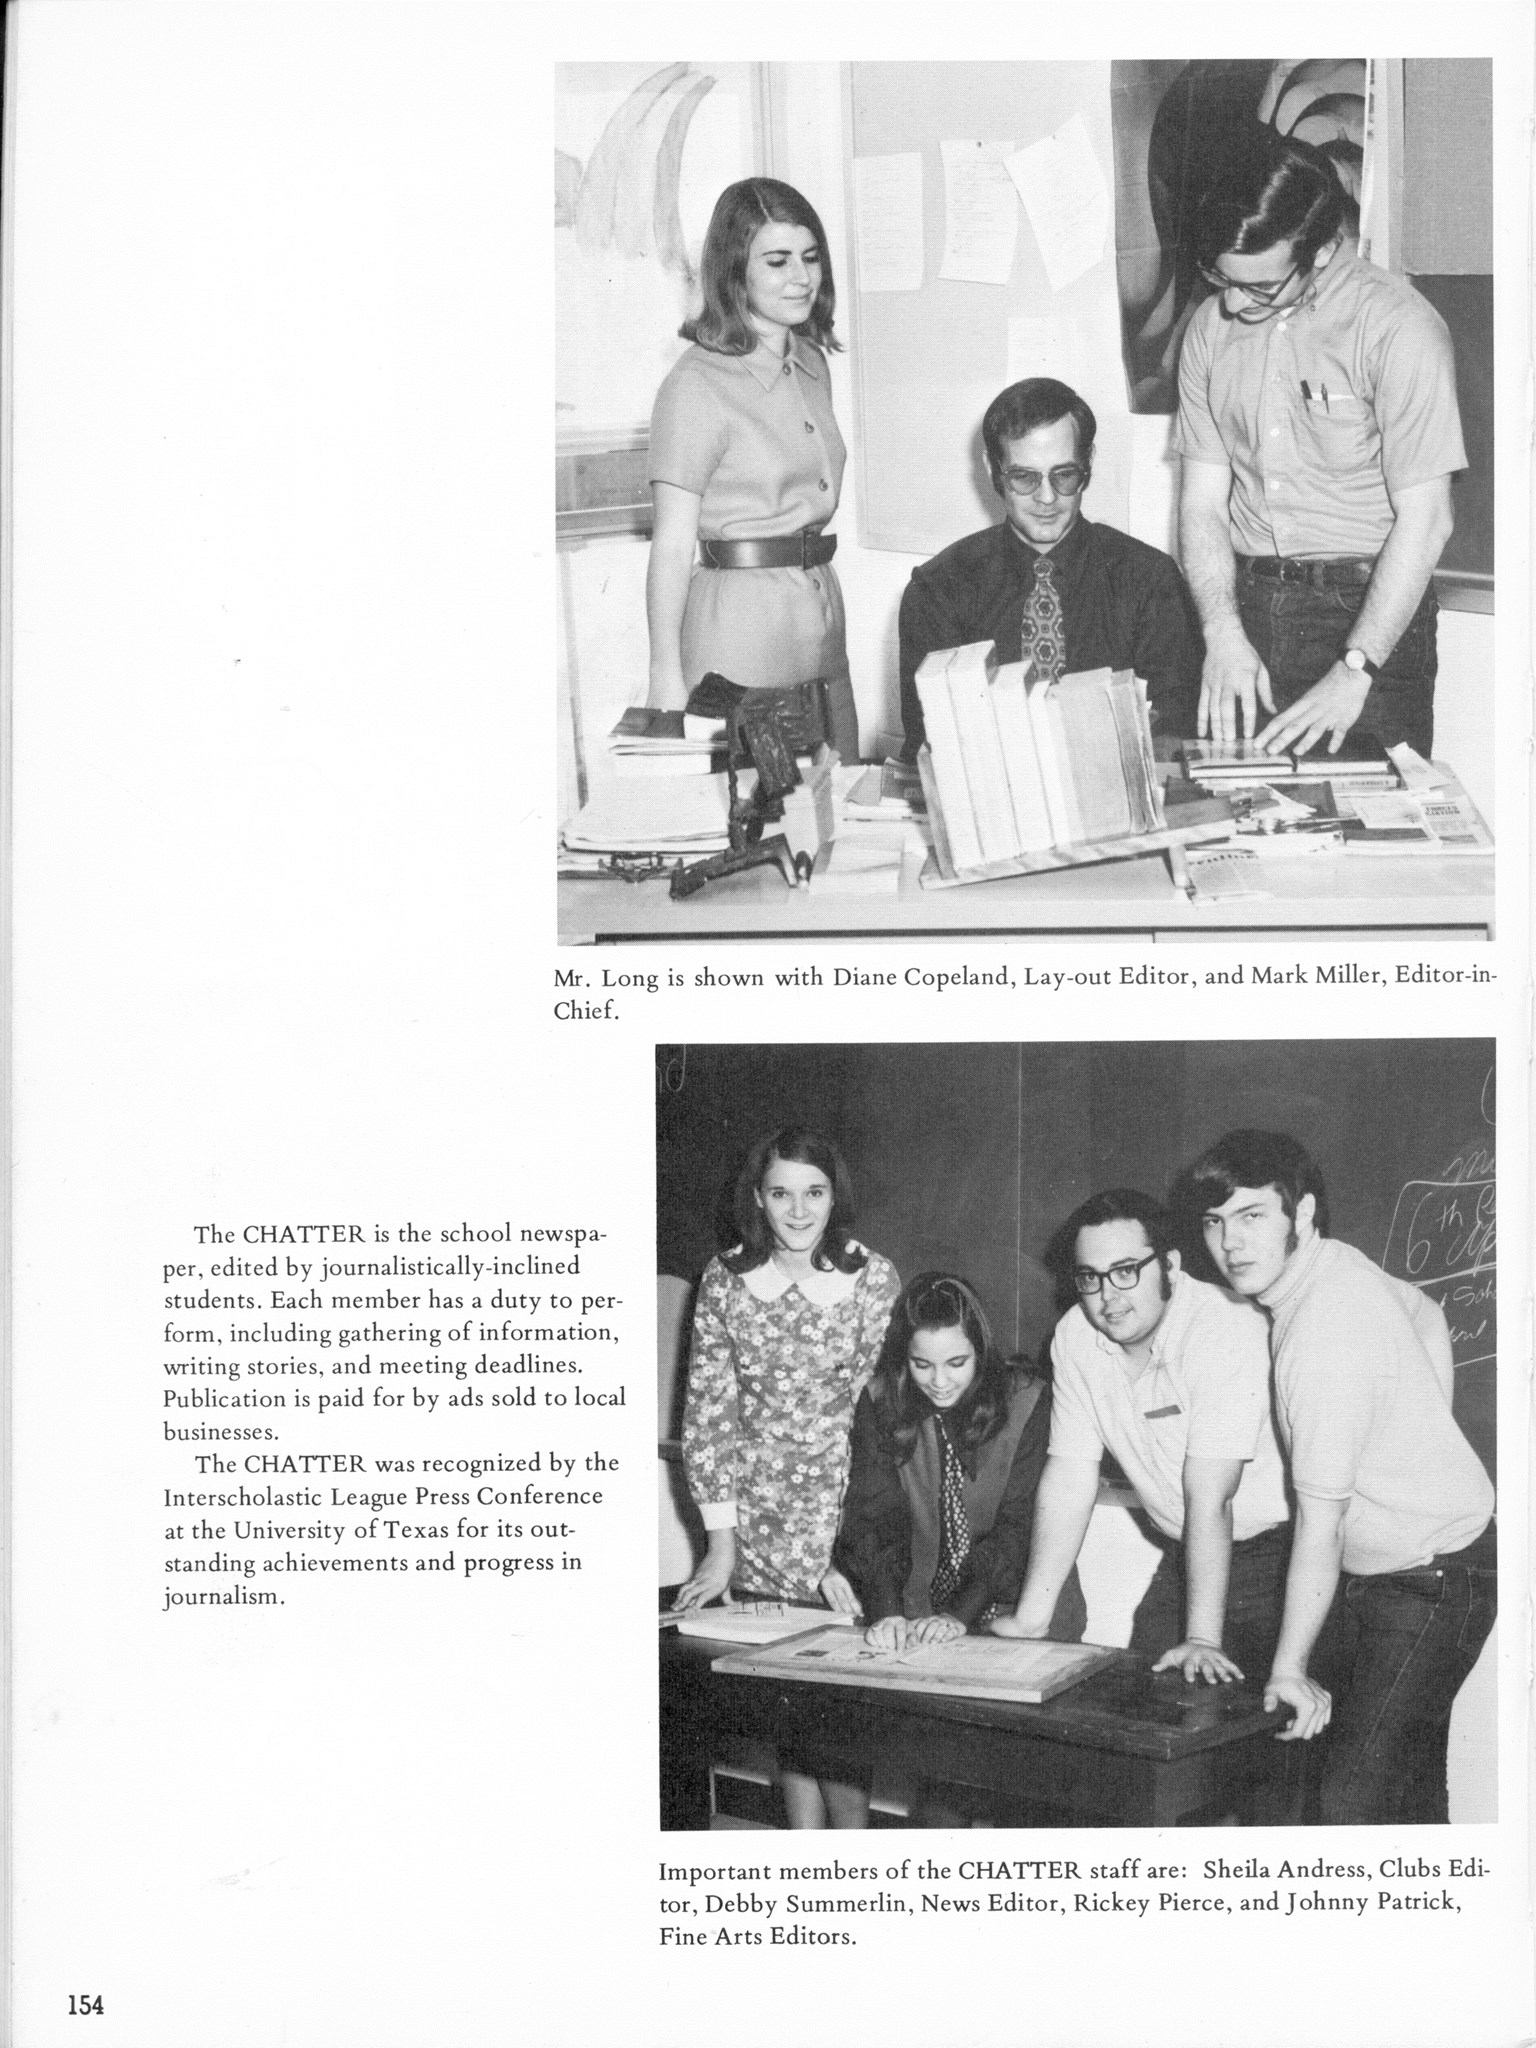 ../../../Images/Large/1970/Arclight-1970-pg0154.jpg